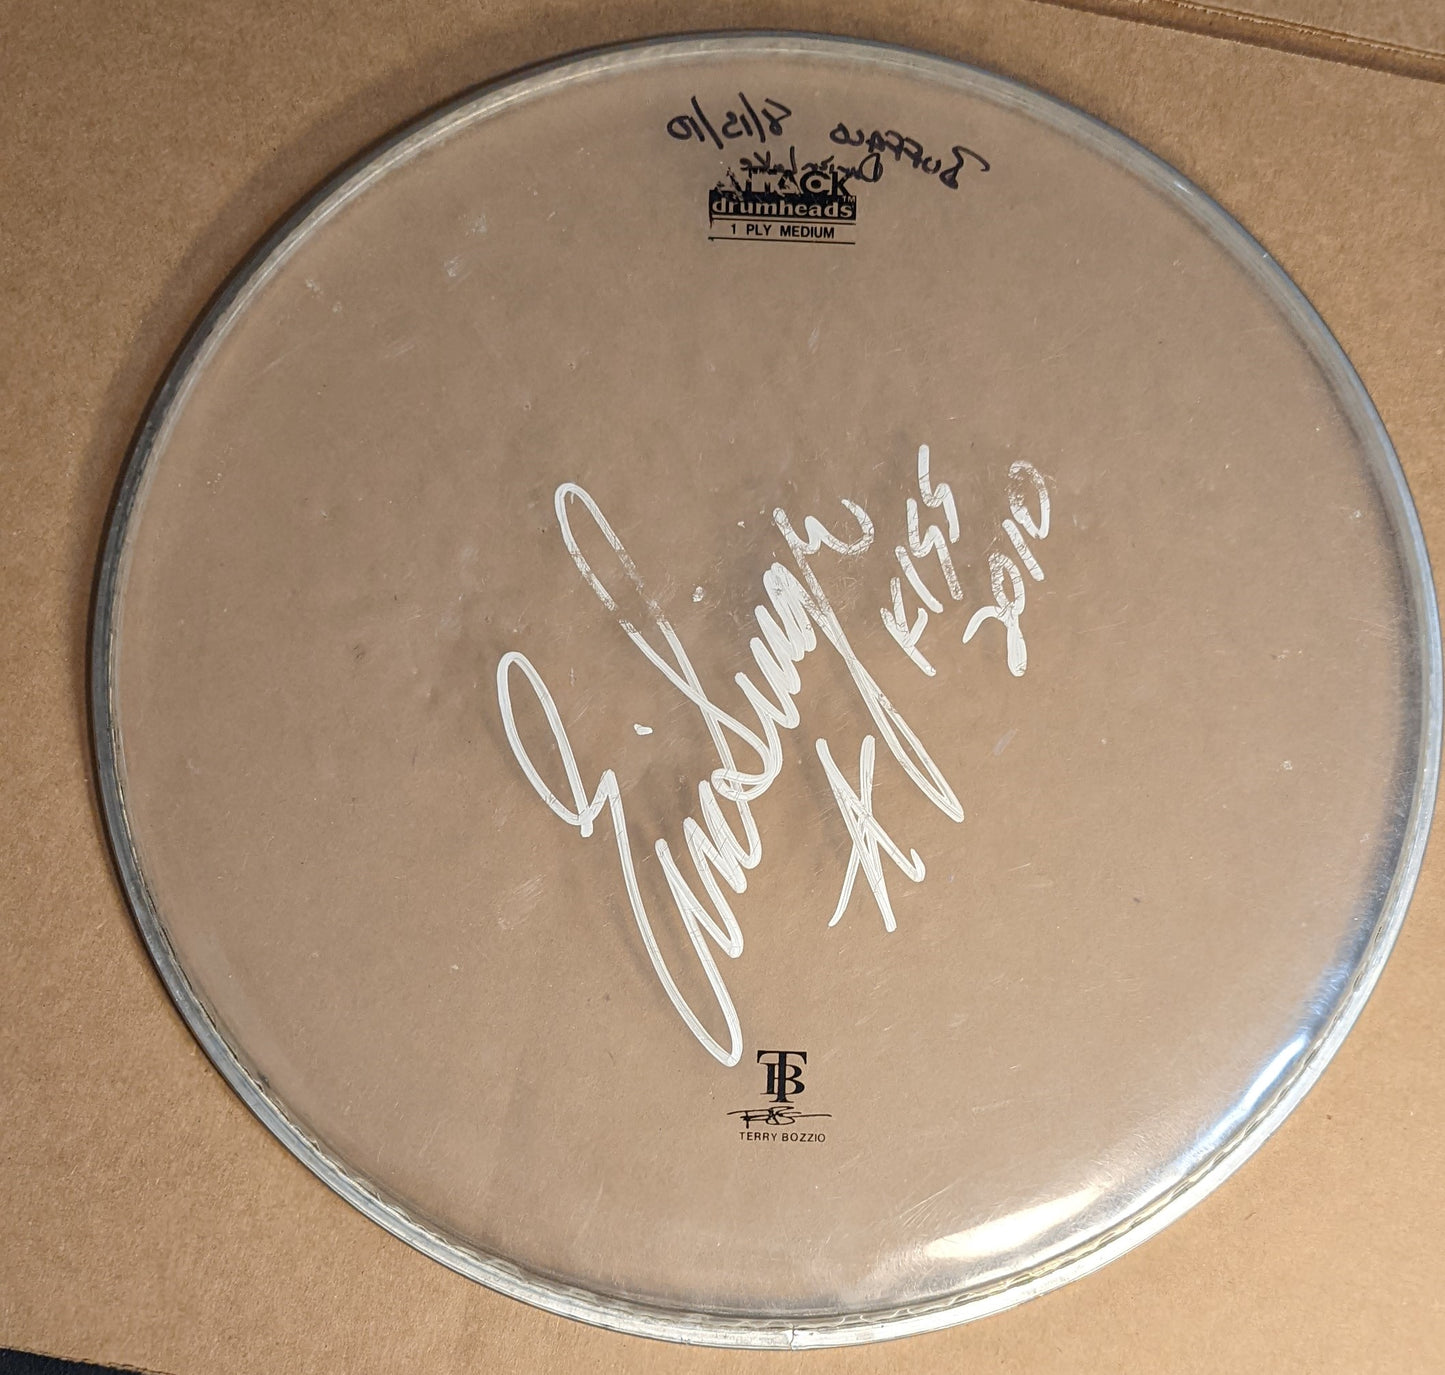 BUFFALO NY DARIEN CENTER 8-13-2010 ERIC SINGER Stage-used signed 13" drum head